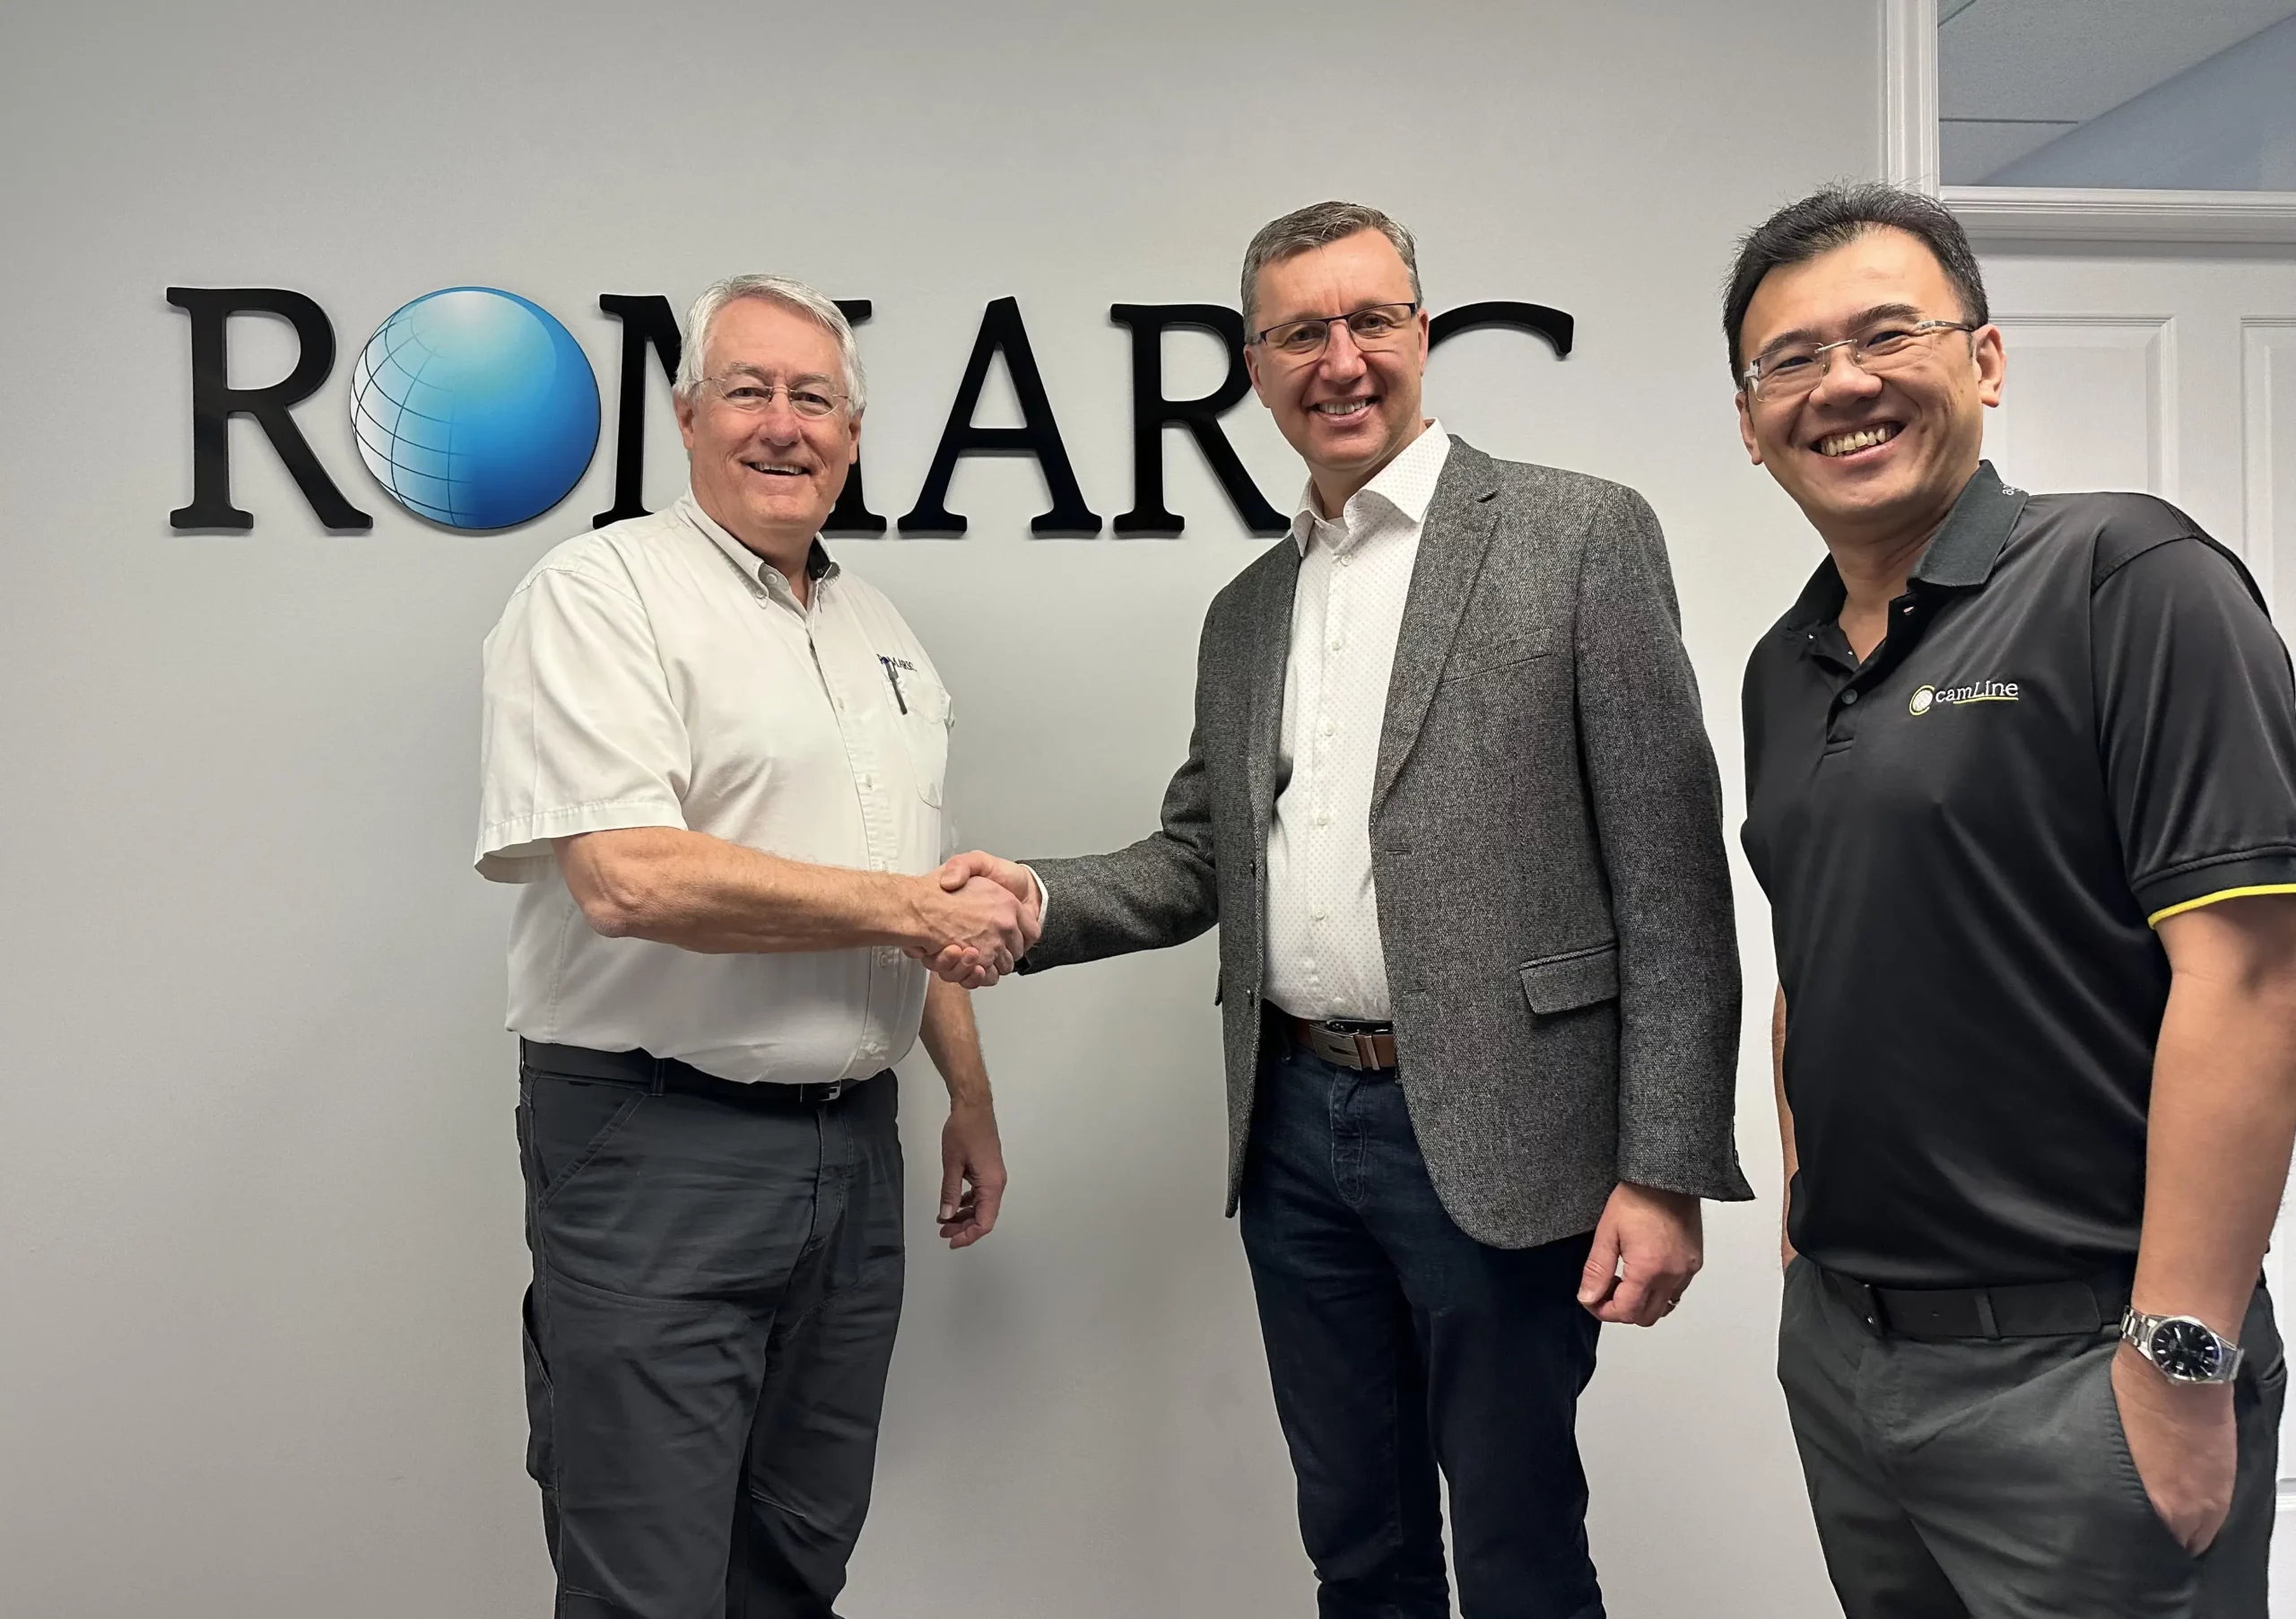 Rory Gagon, CEO and founder of Romaric (left) shaking hand with Henri Korpi, Executive Vice President of Elisa International Digital Services (middle), with Bryan Ng, CEO of camLine (right) standing on the side.